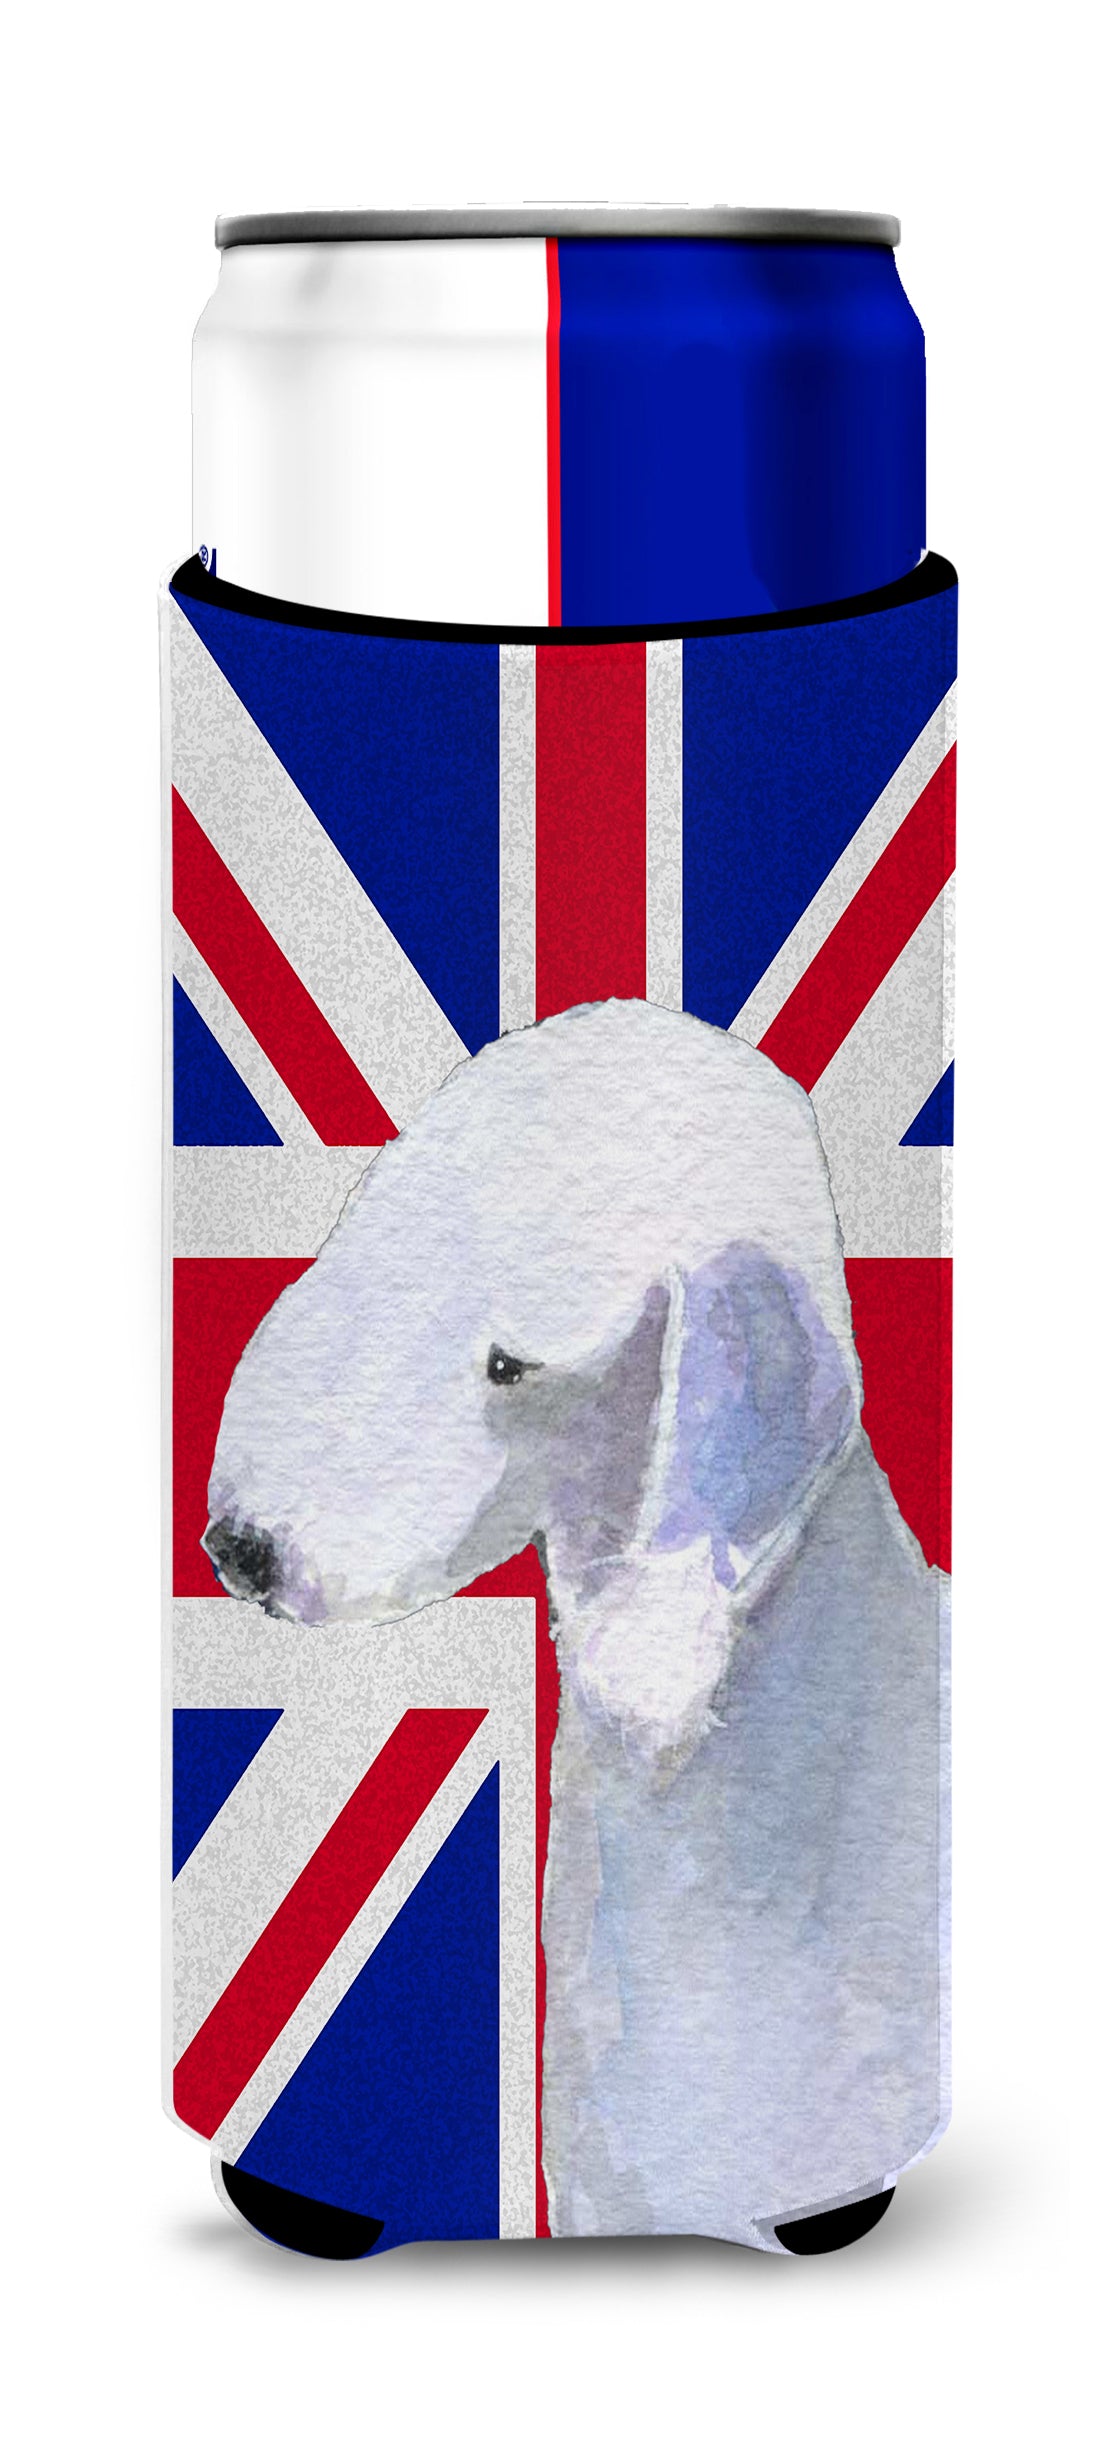 Bedlington Terrier with English Union Jack British Flag Ultra Beverage Insulators for slim cans SS4925MUK.